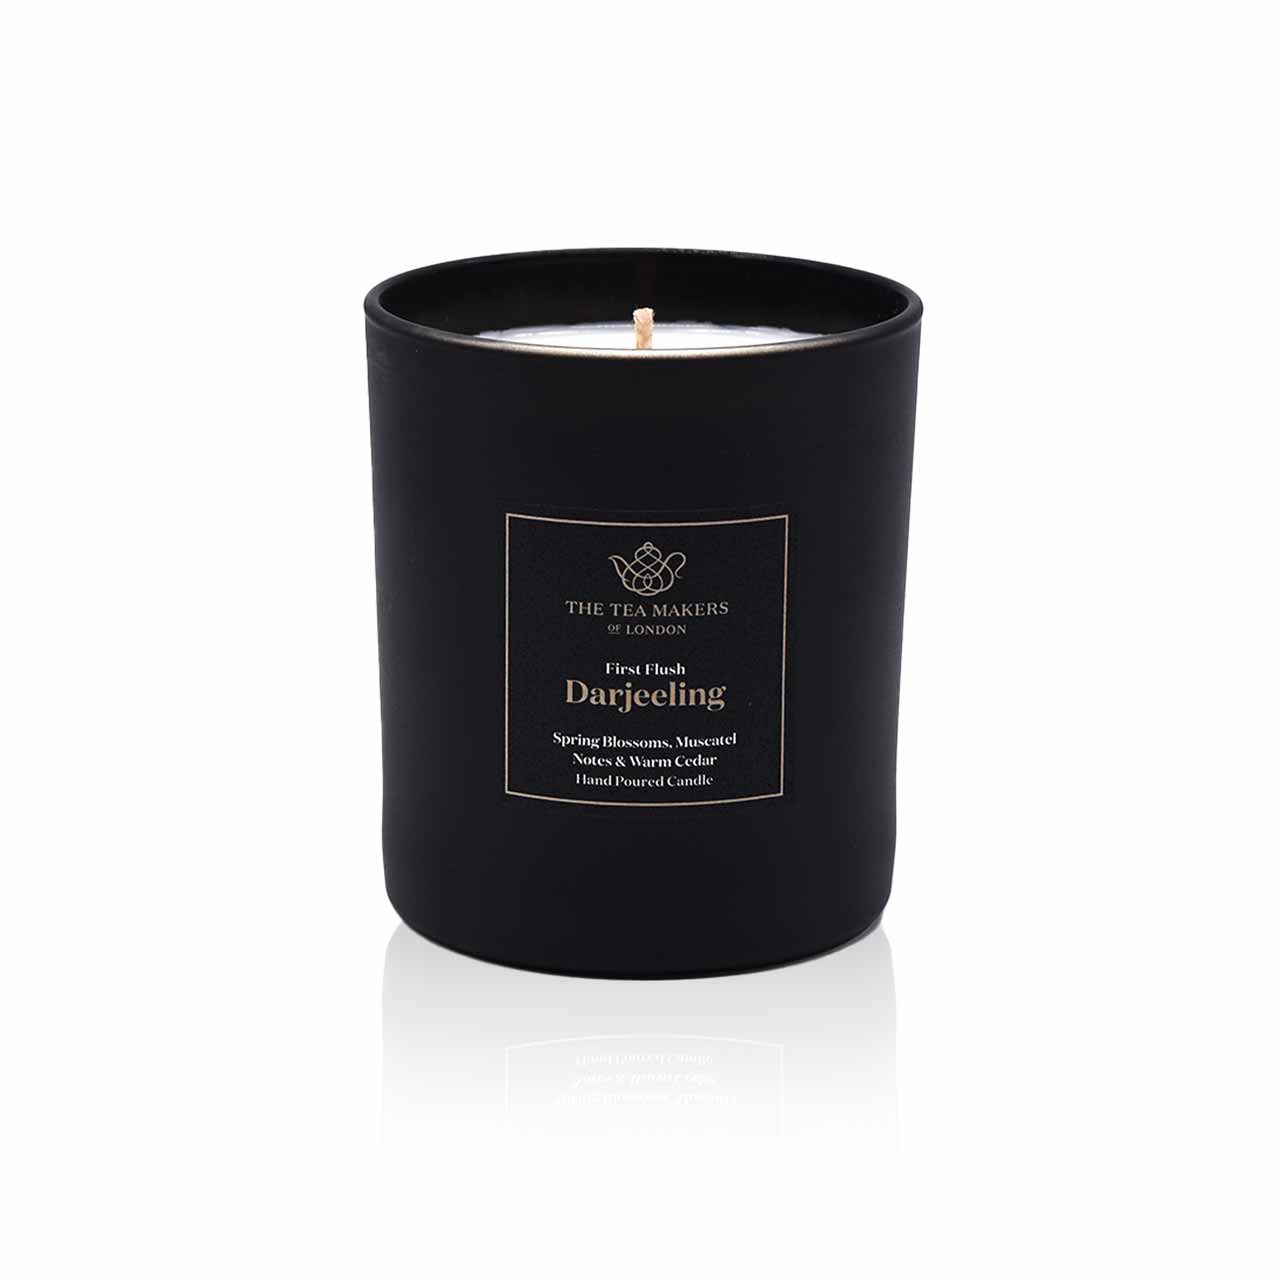 First Flush Darjeeling Tea Scented Candle | Luxury Tea Scented Gifts